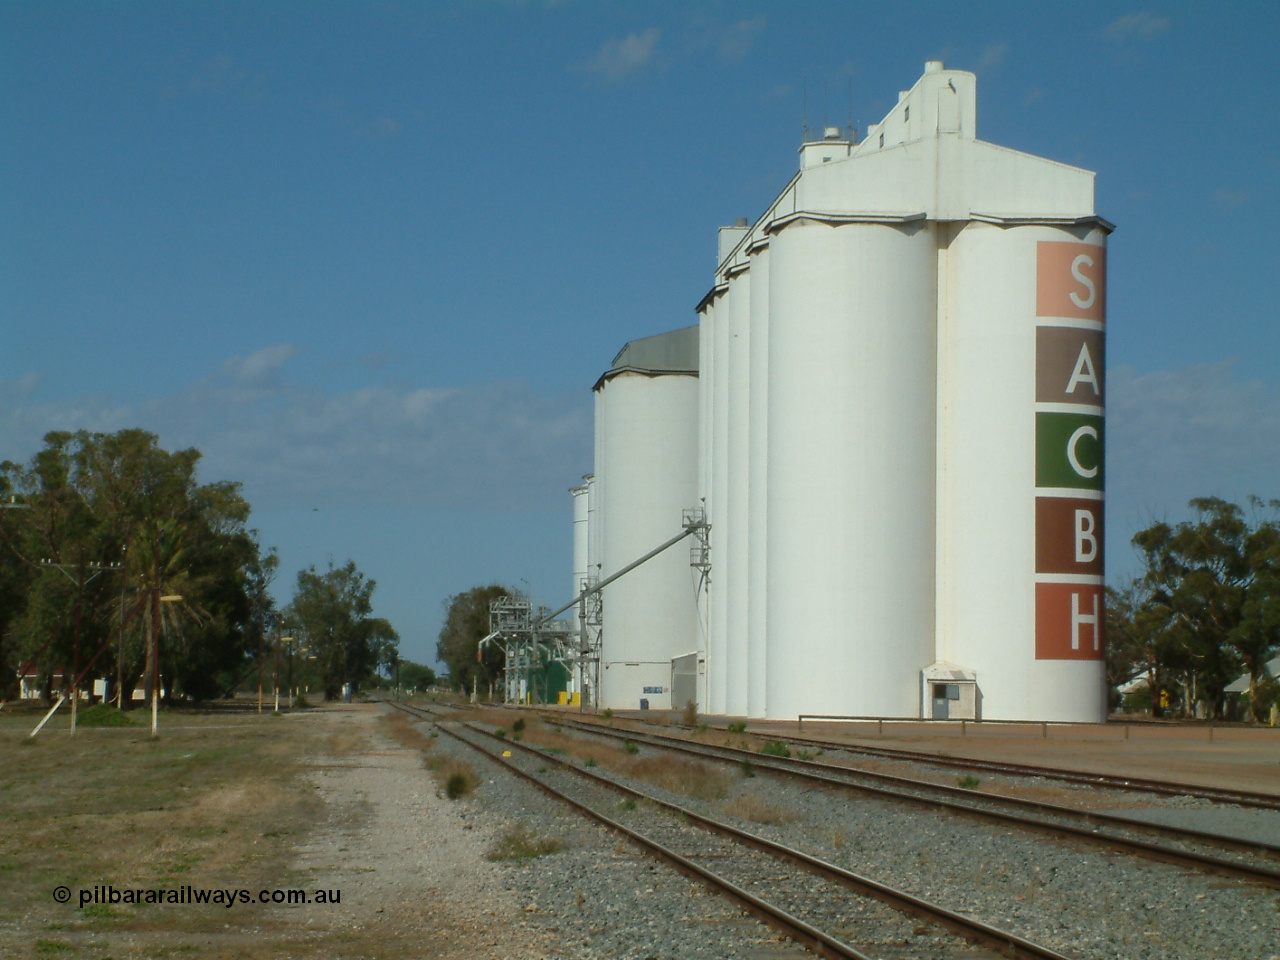 030406 095408
Cummins, view of the three grain storage silo complexes, looking south along the old alignment for the fourth siding, and barracks at the left of frame. 6th April 2003.
